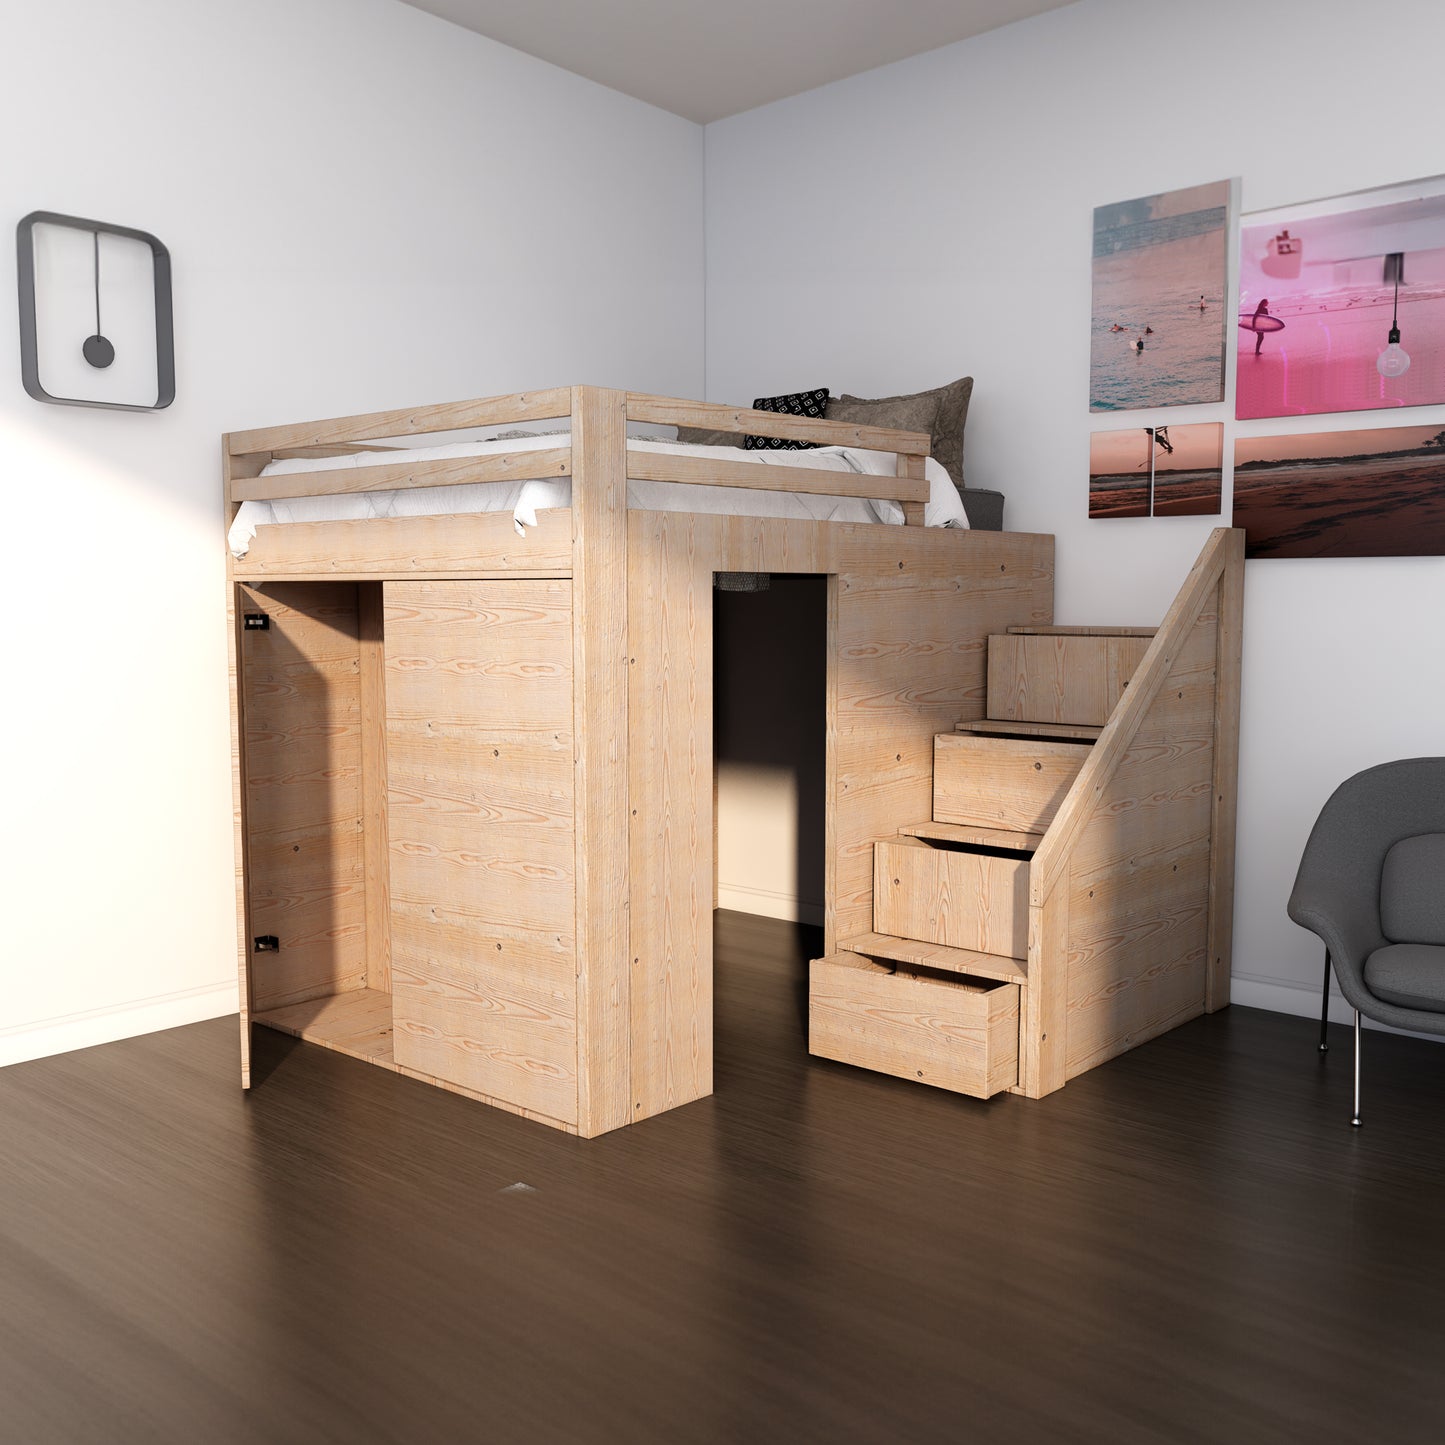 DIY Full-Size Wood Bunk Bed Plan and Animation: Build Your Own Stylish and Functional Bunk Bed